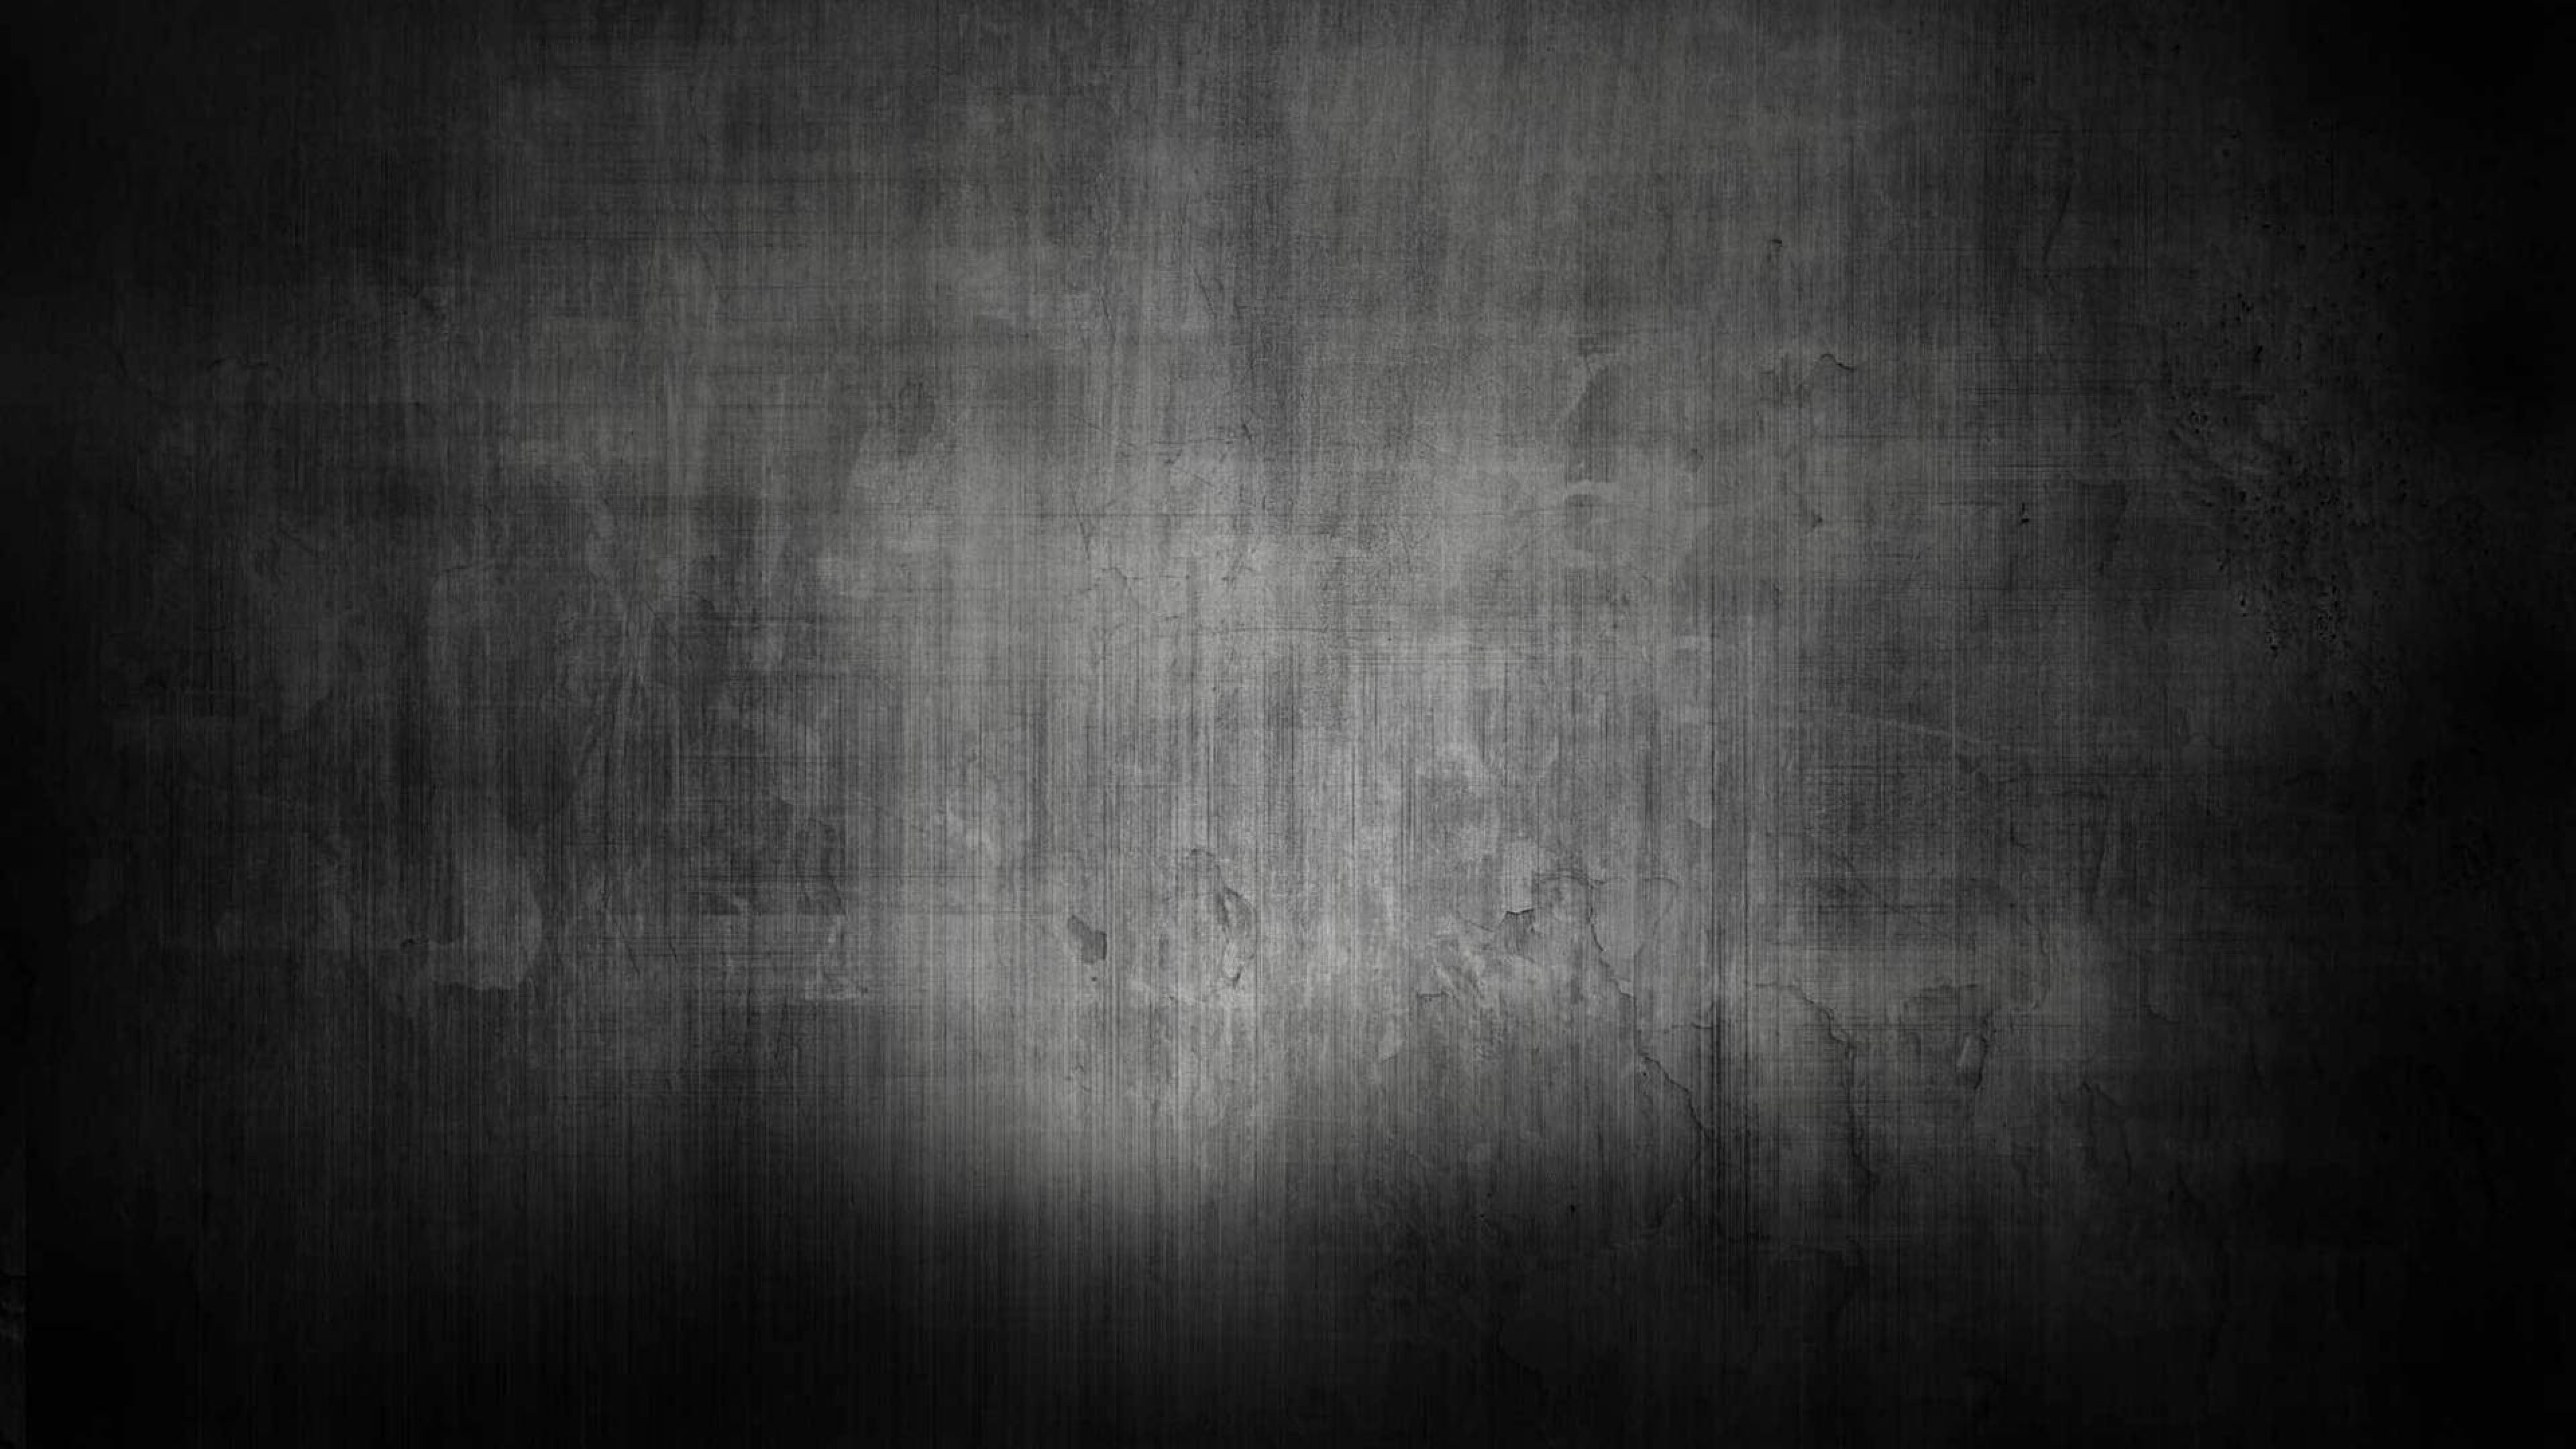 Black and White Texture Wallpaper Free Black and White Texture Background